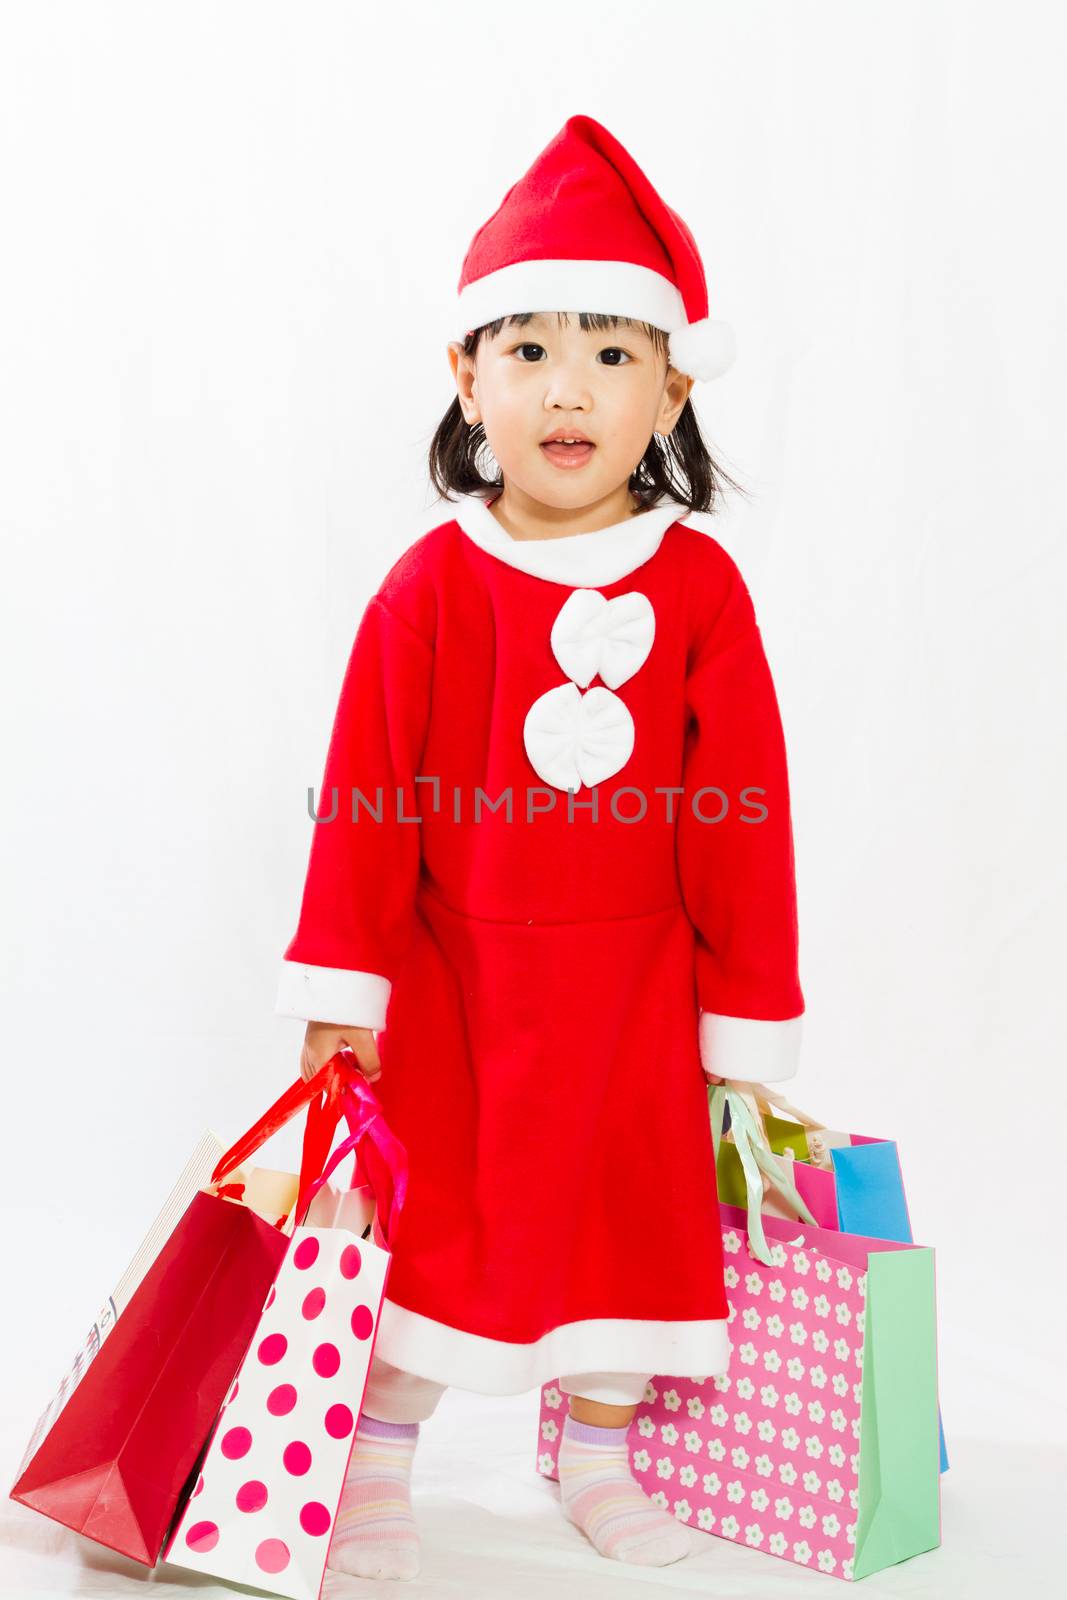 Asian Little Santa Claus with shopping bag in white isolated background